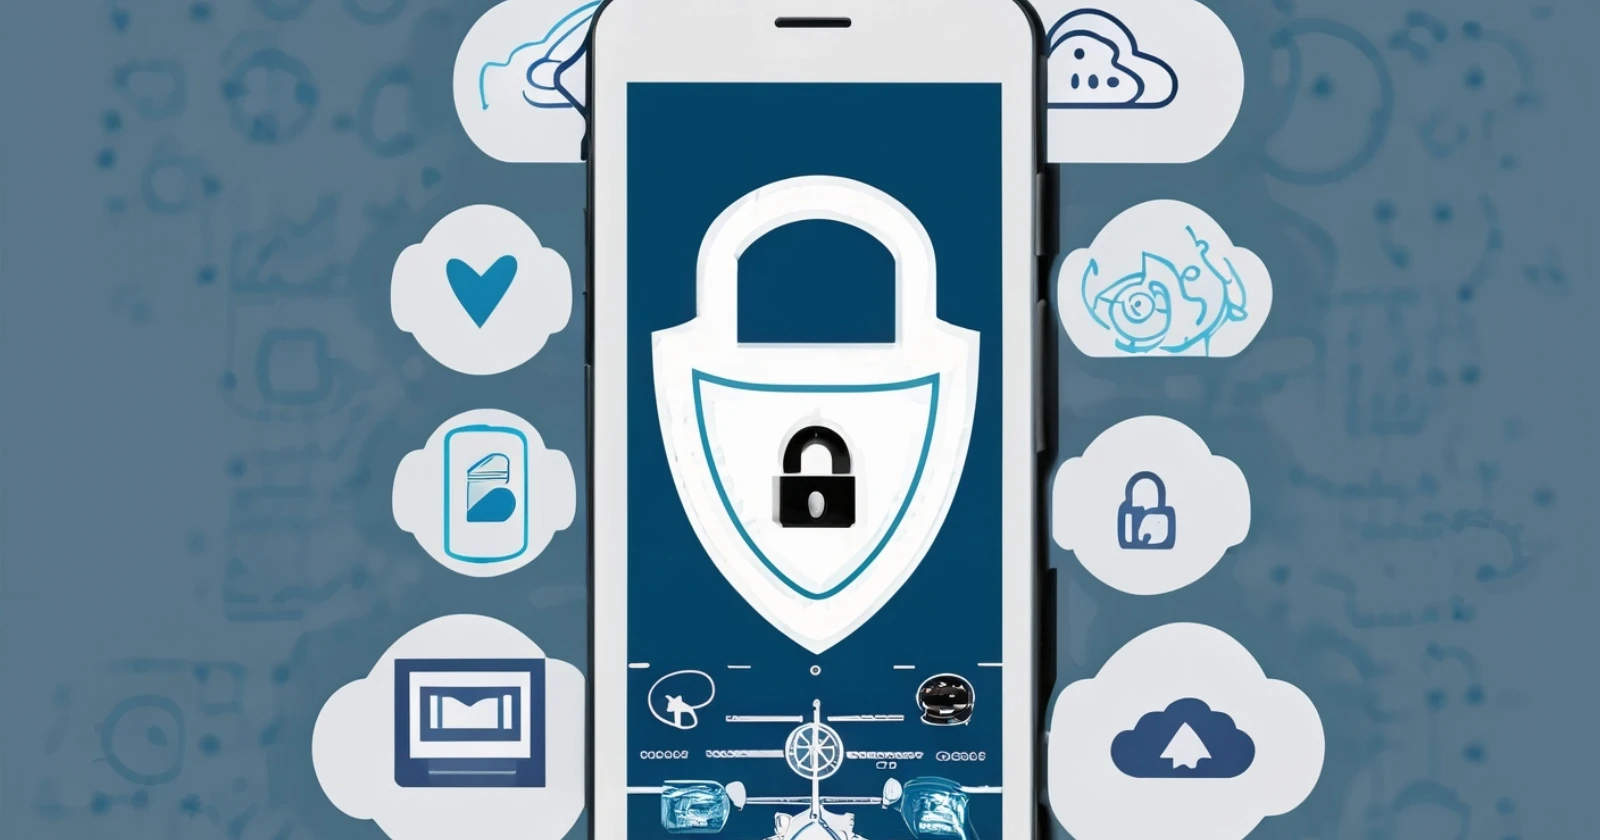 mobile security tips marathi secure protection phone 